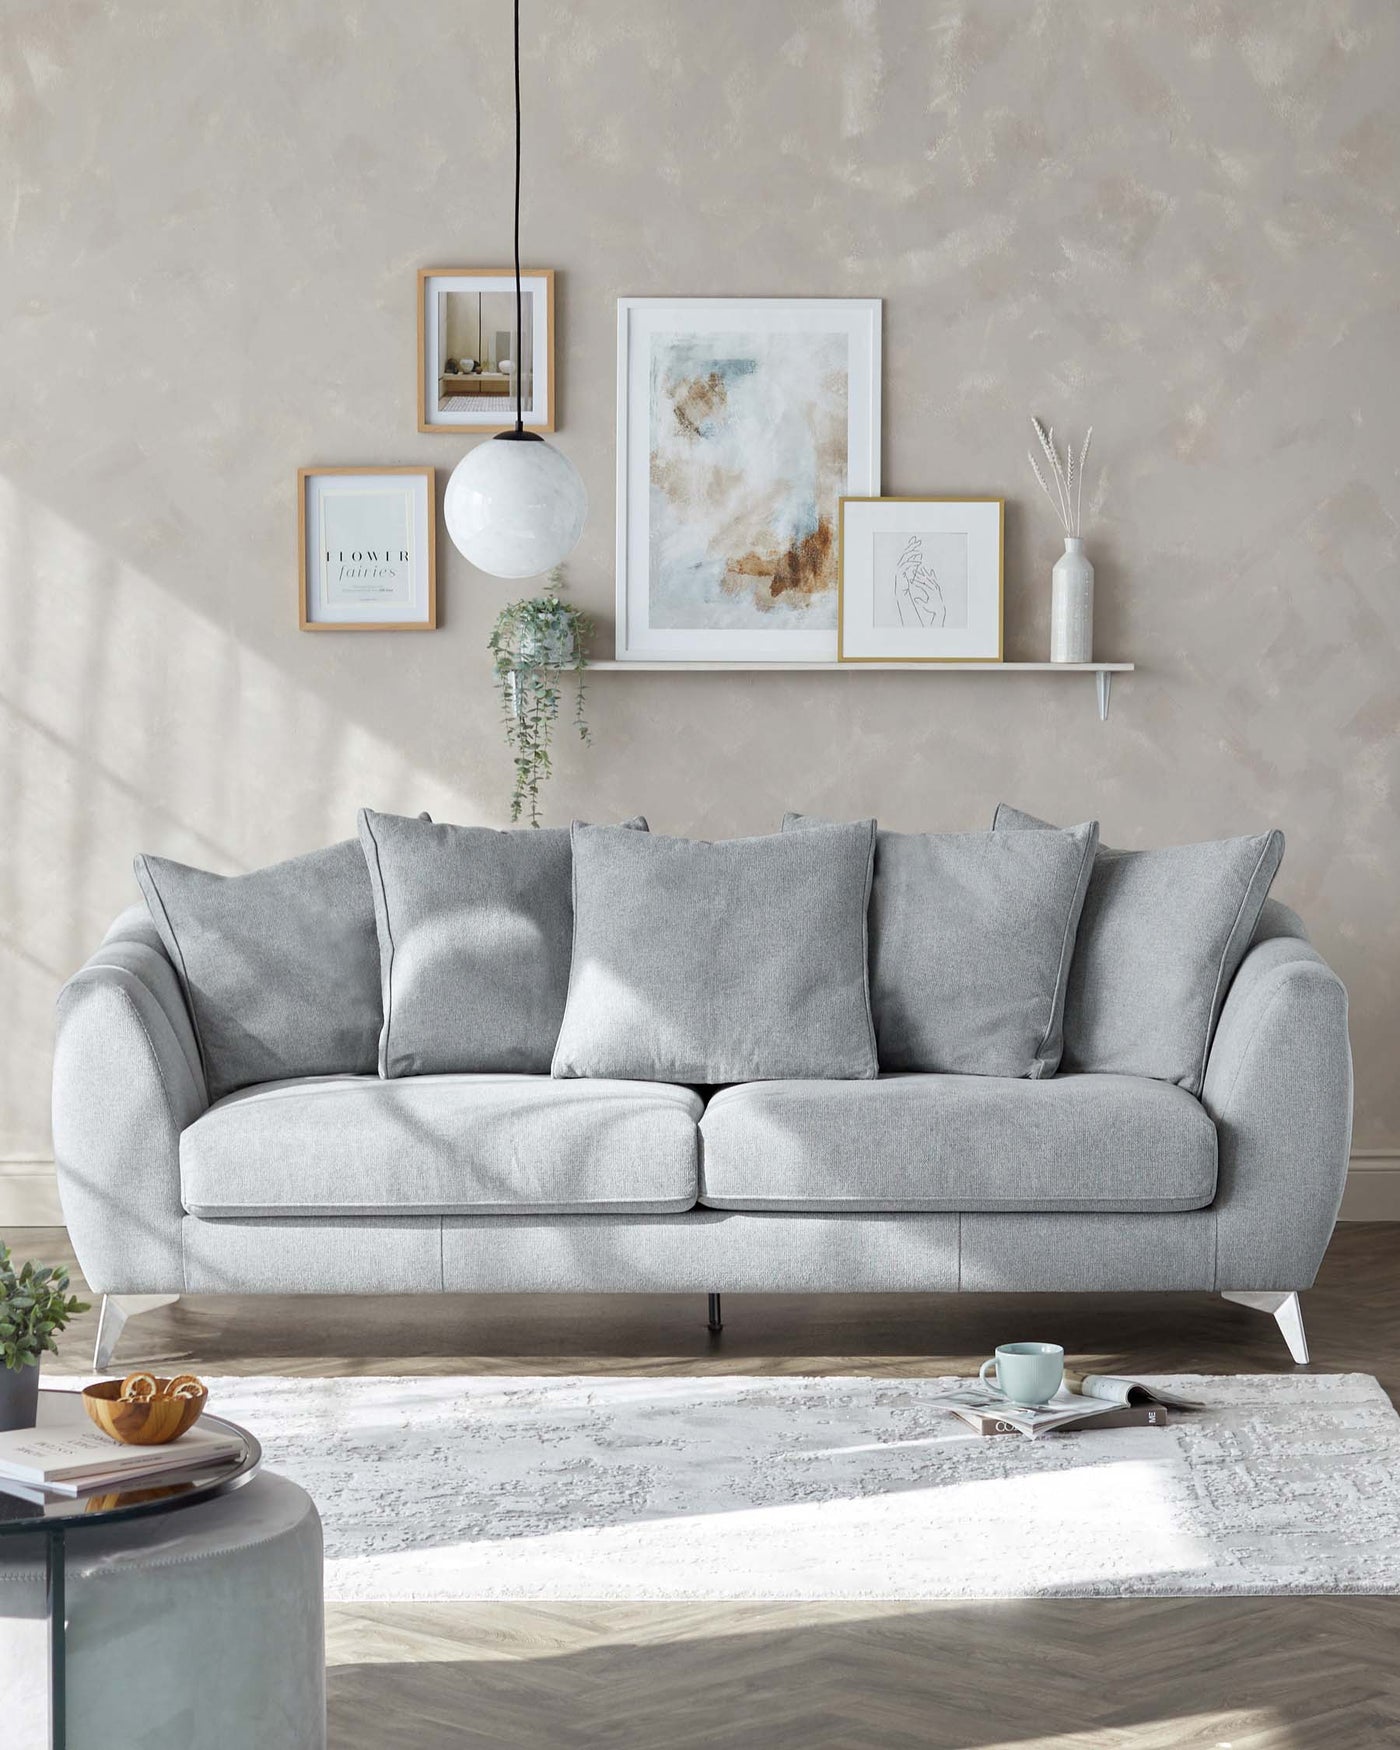 A modern light grey fabric sofa with plush back cushions and a tufted seat cushion resting on low-profile metal legs. The sofa is adorned with matching grey throw pillows and is set against a textured beige wall with decorative floating shelves and framed artwork above. A minimalist white area rug lies beneath the sofa, accompanied by a sleek round side table and a casually placed magazine and tea set on the floor.